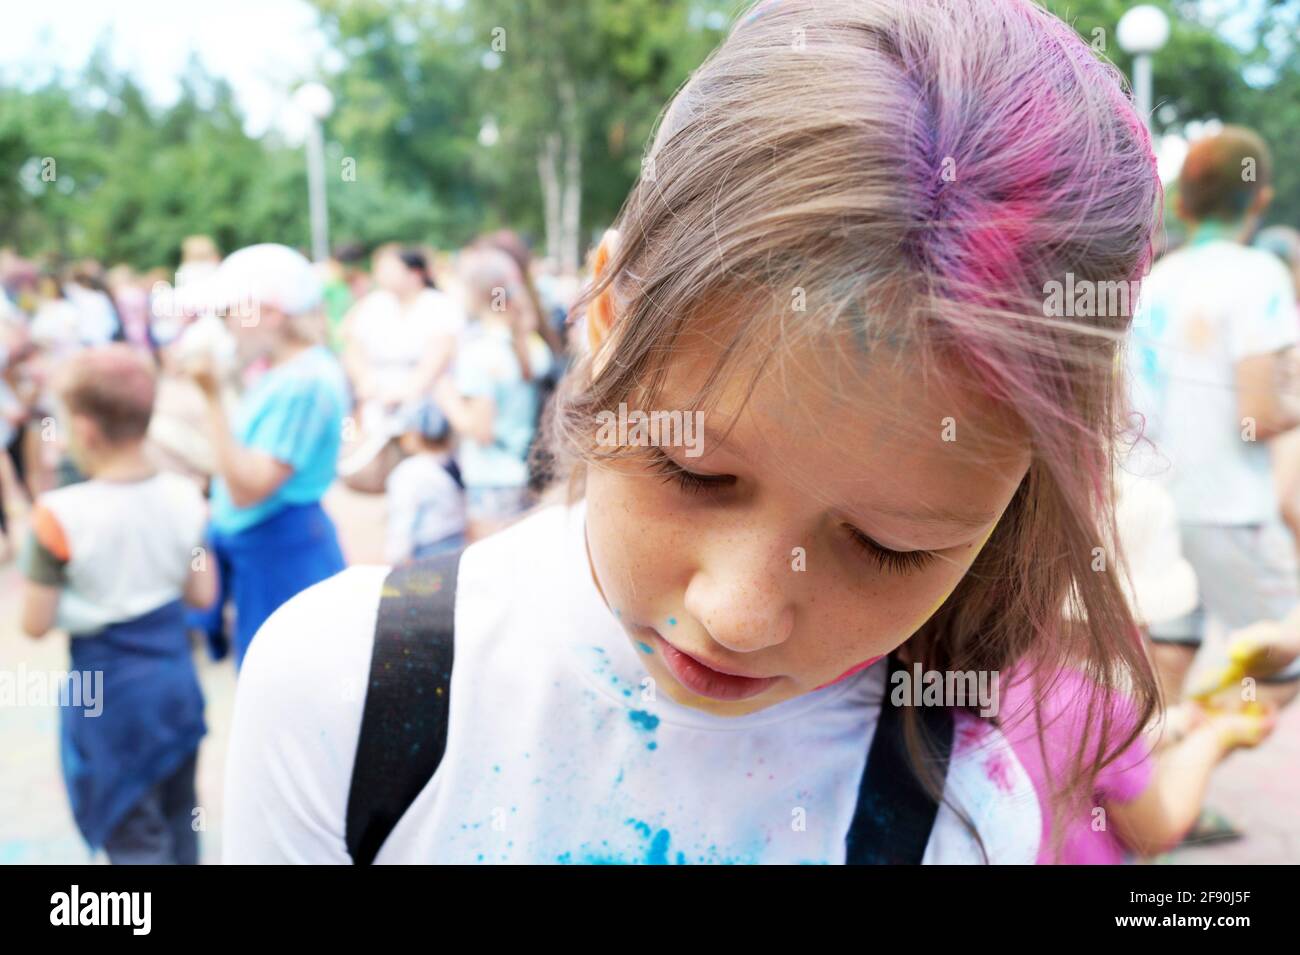 A girl 10-15 years old stained with paint lowered her head down Stock Photo